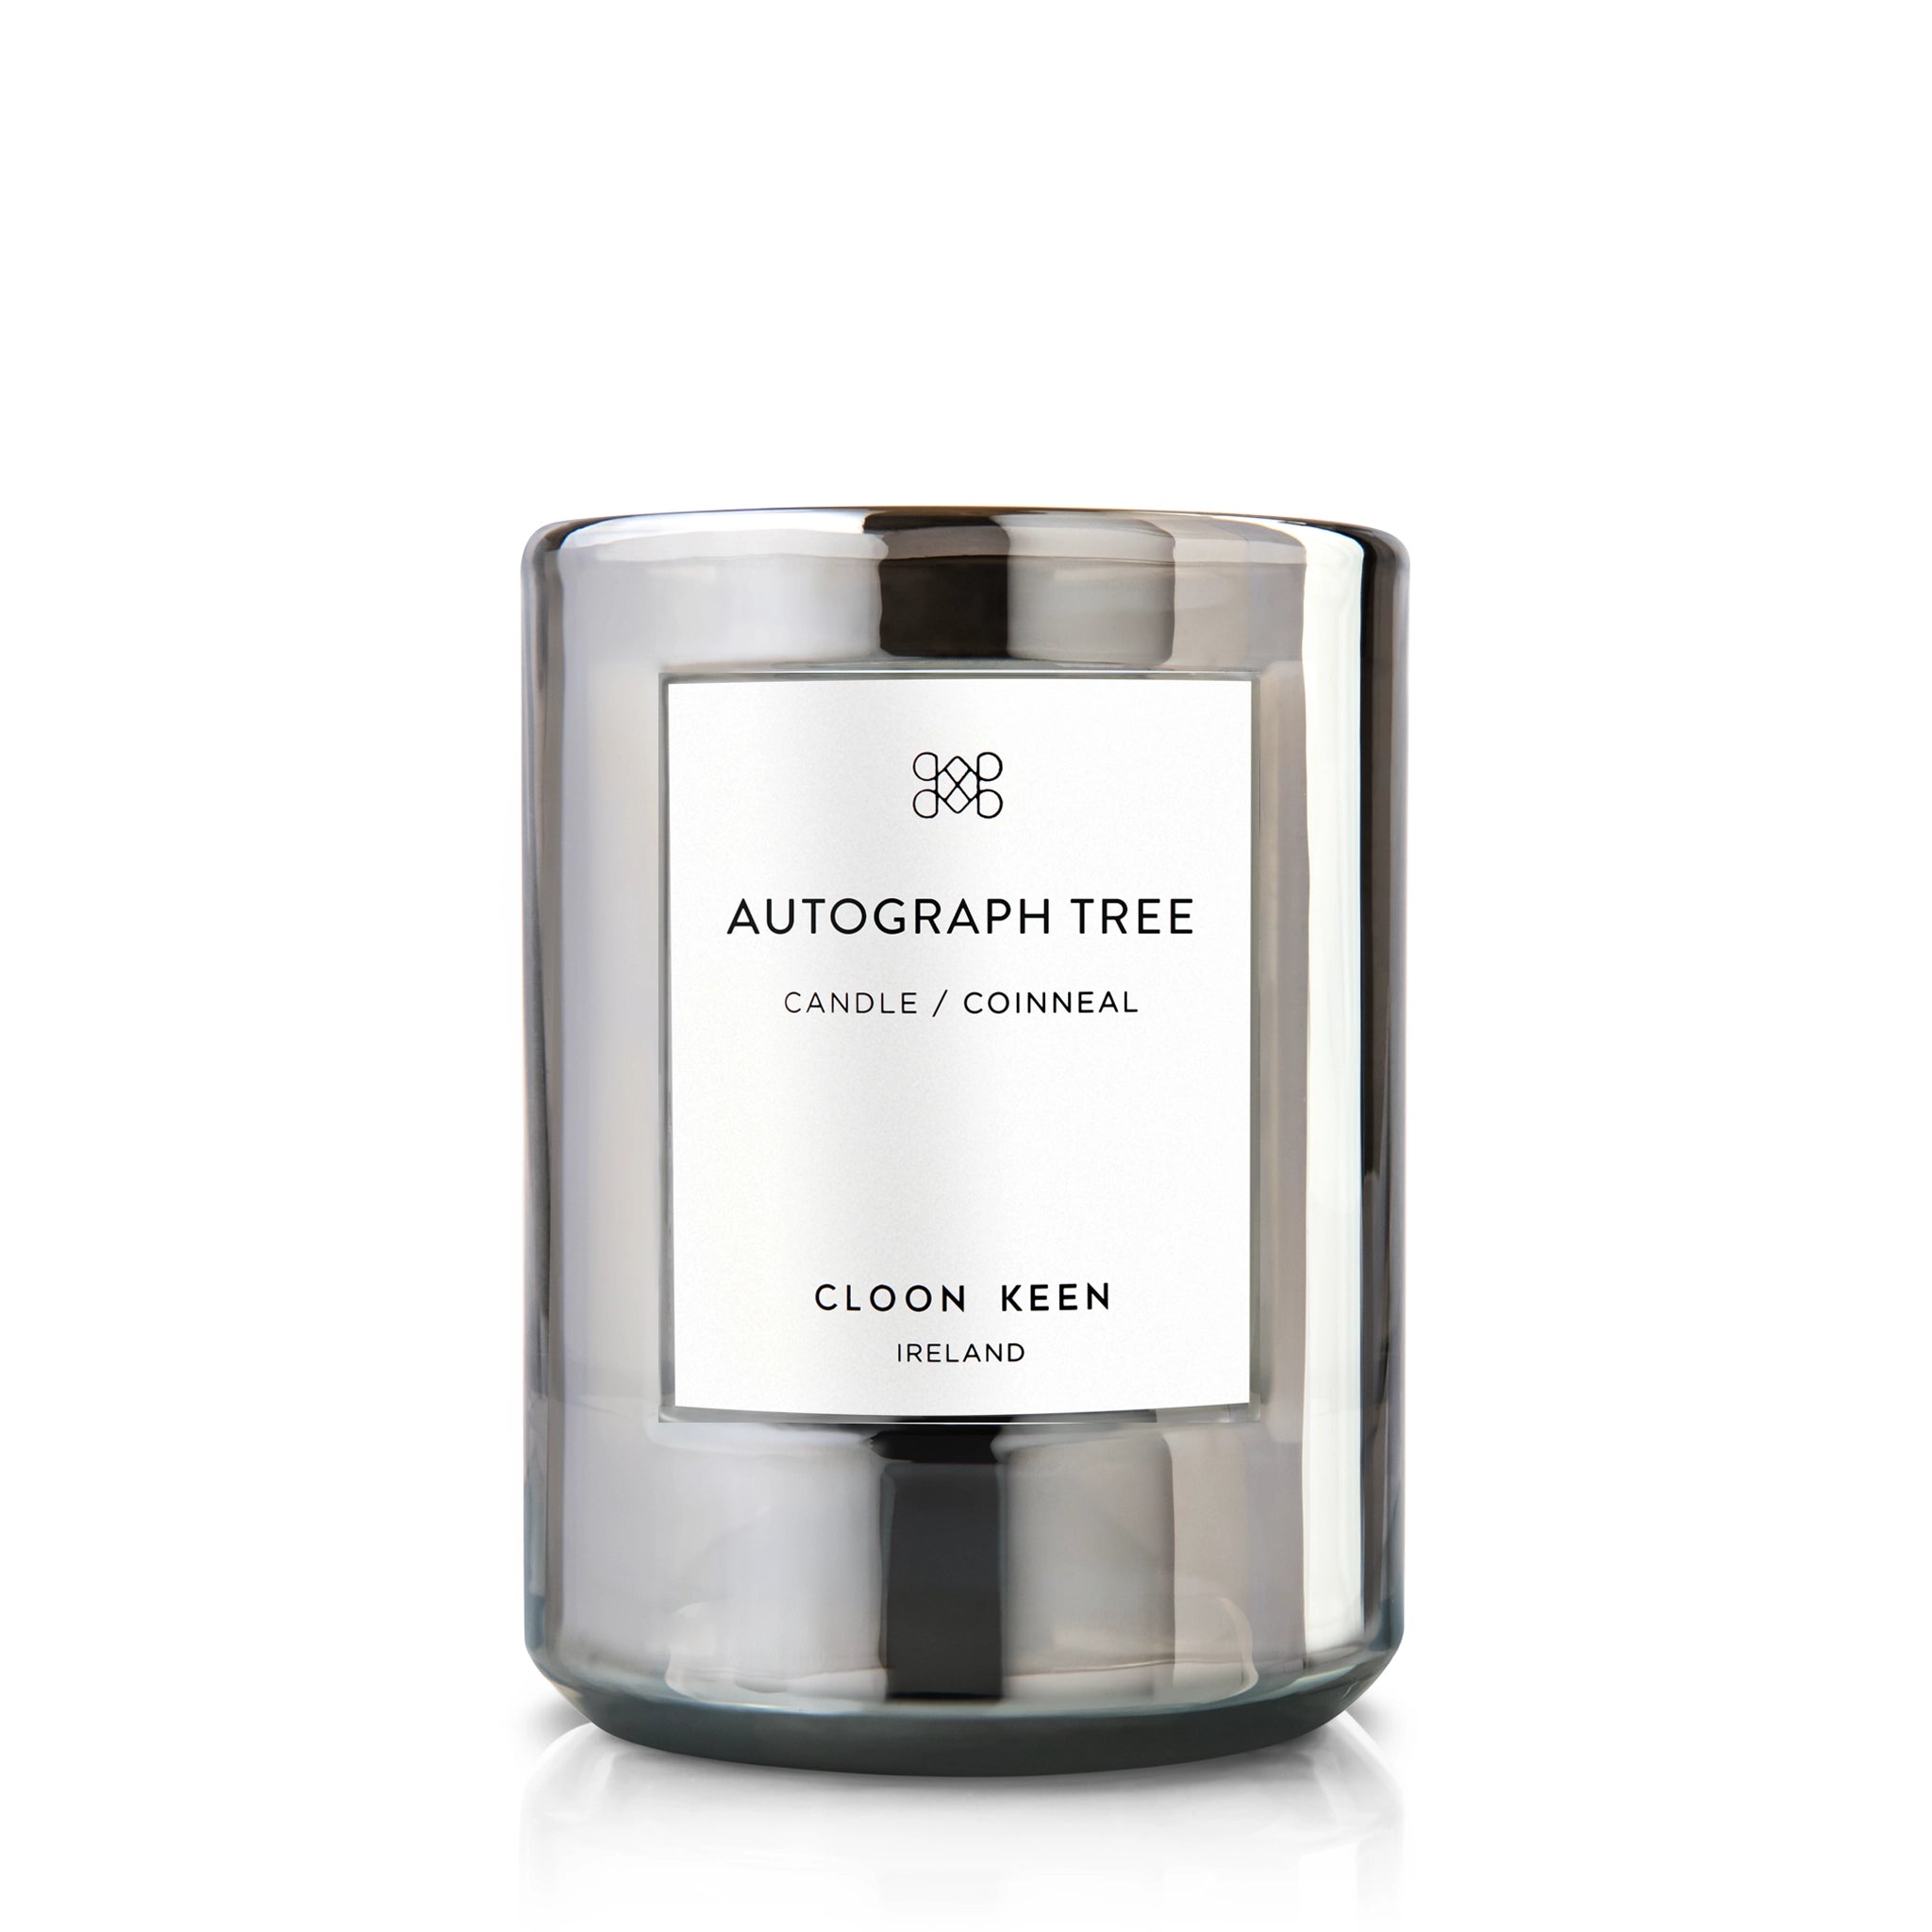 Discover Cloon Keen Autograph Tree candle. Carved bark of blonde wood burnished with oud, exotic spices, and a puff of sacred incense.